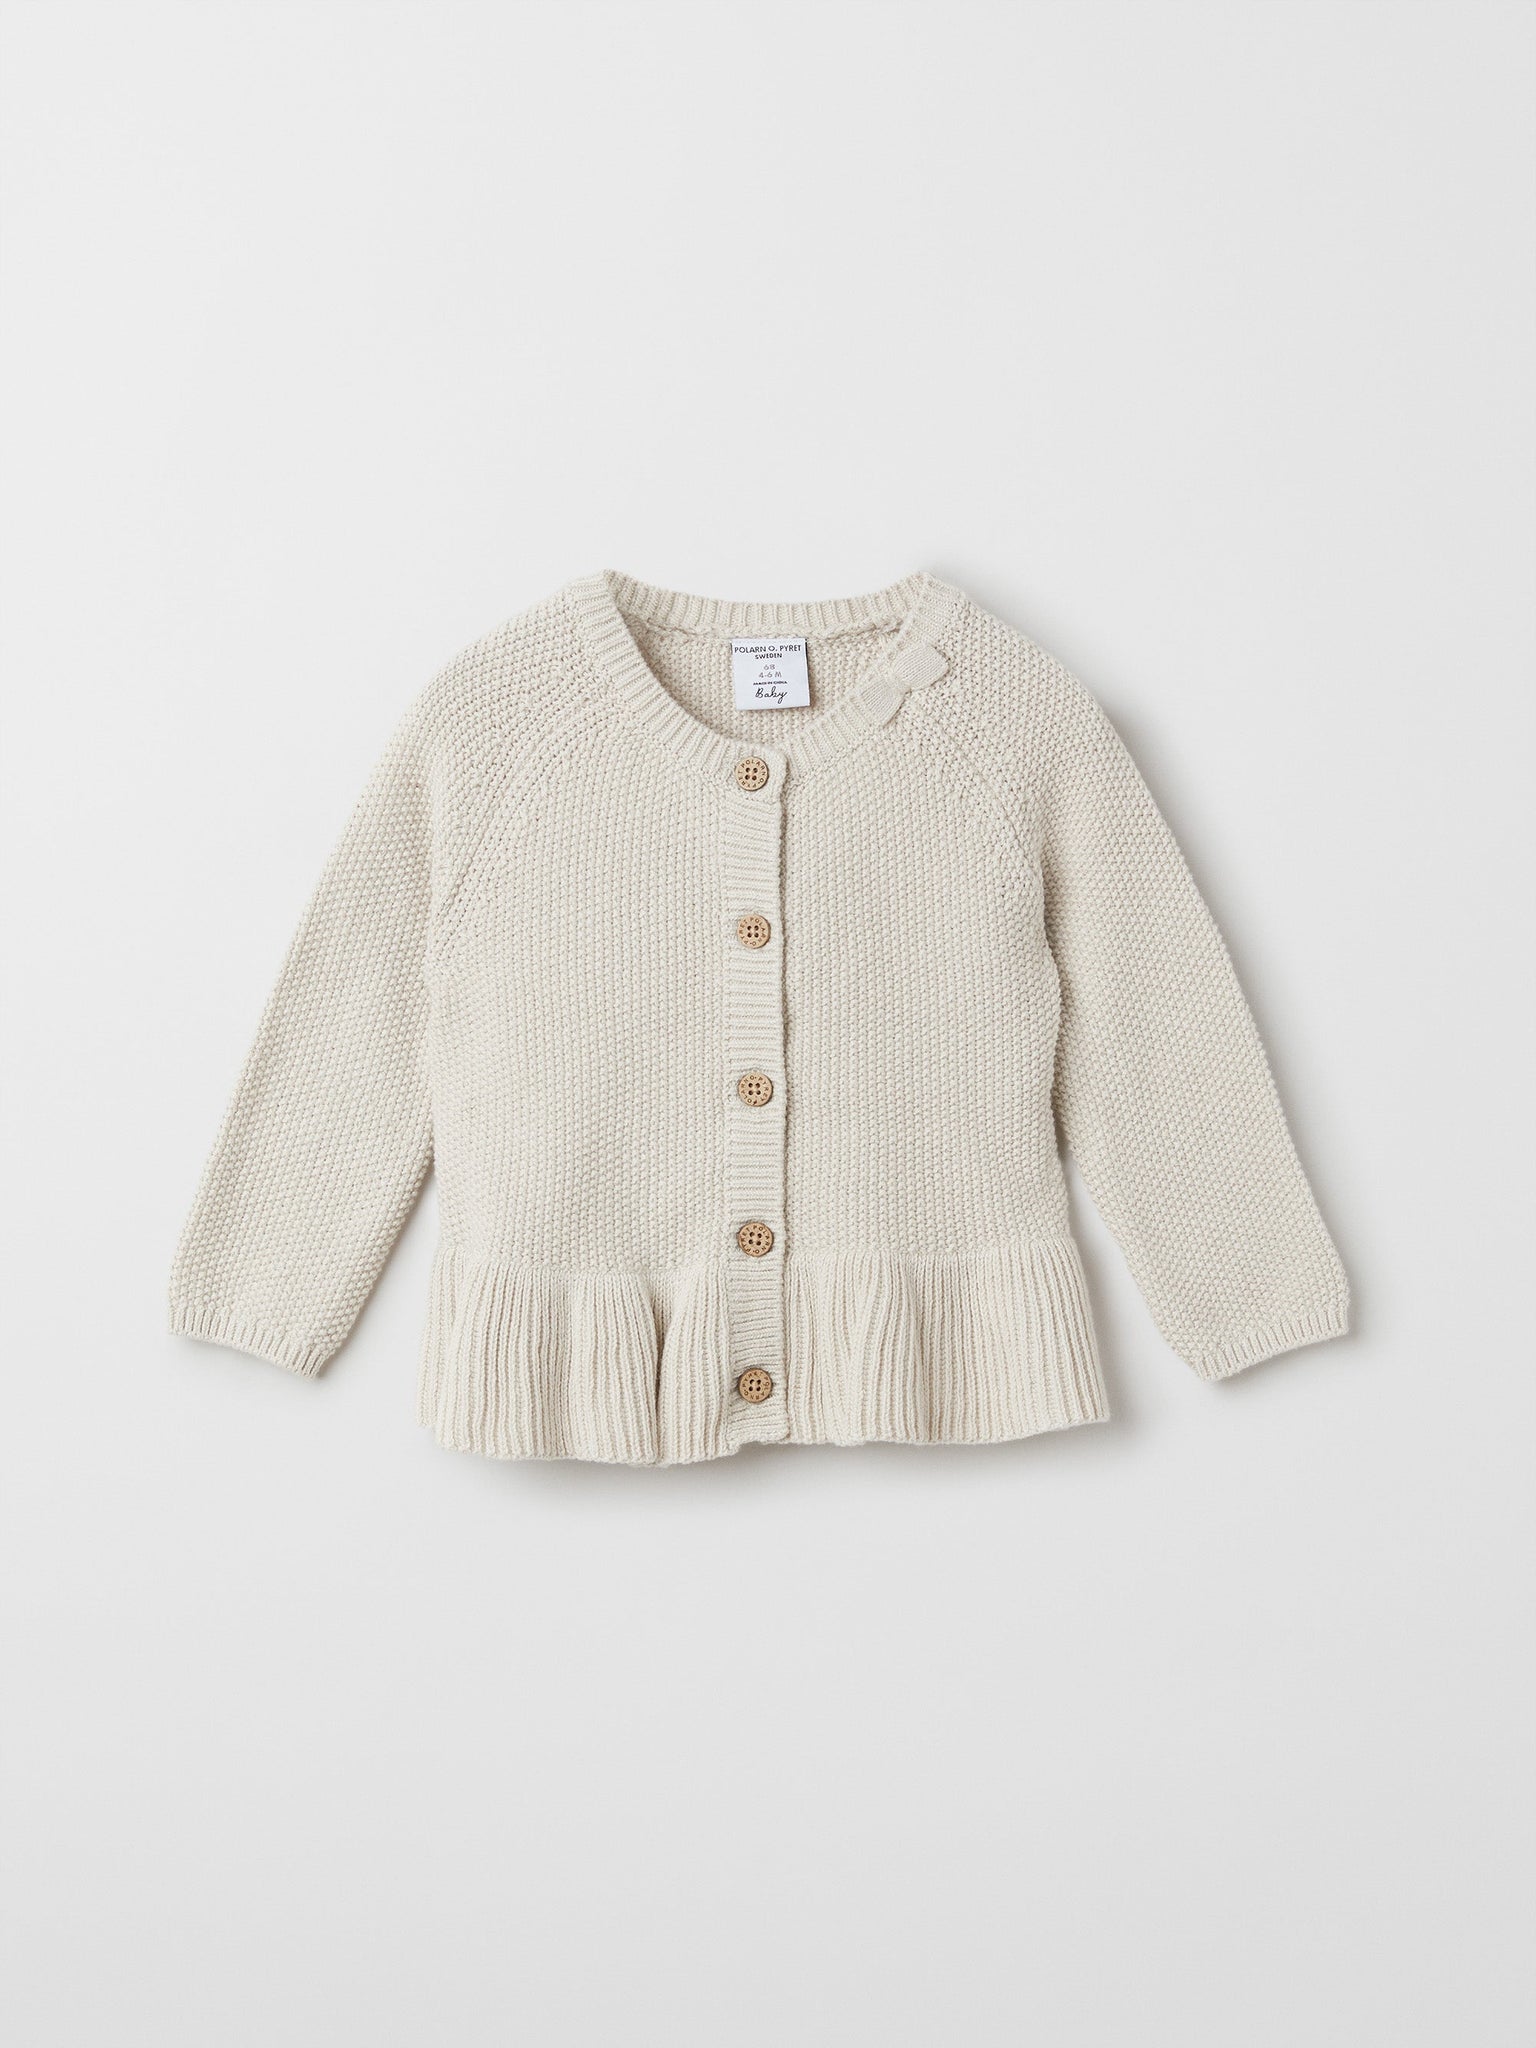 Organic Cotton Beige Baby Cardigan from the Polarn O. Pyret baby collection. Nordic baby clothes made from sustainable sources.